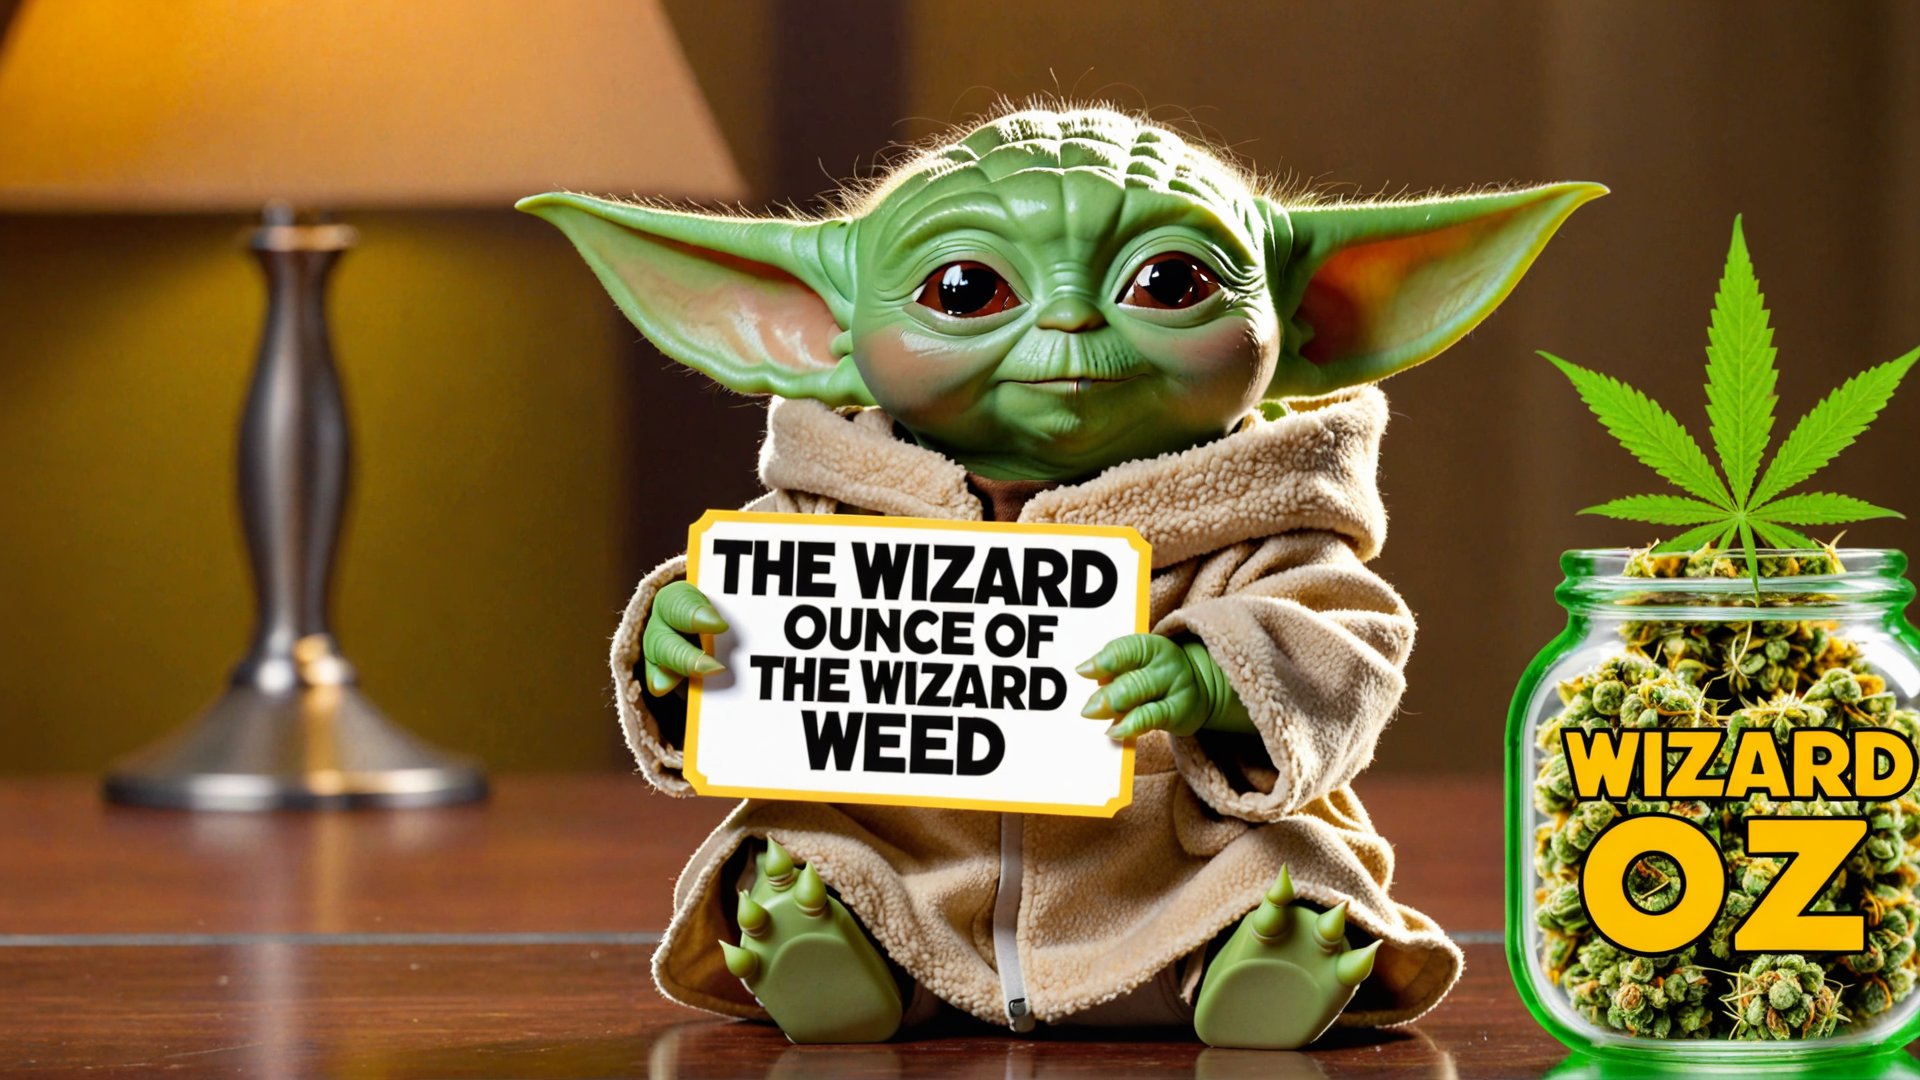 photo of baby yoda with a jar of cannabis with a sign saying "the wizard of oz" ounce of weed